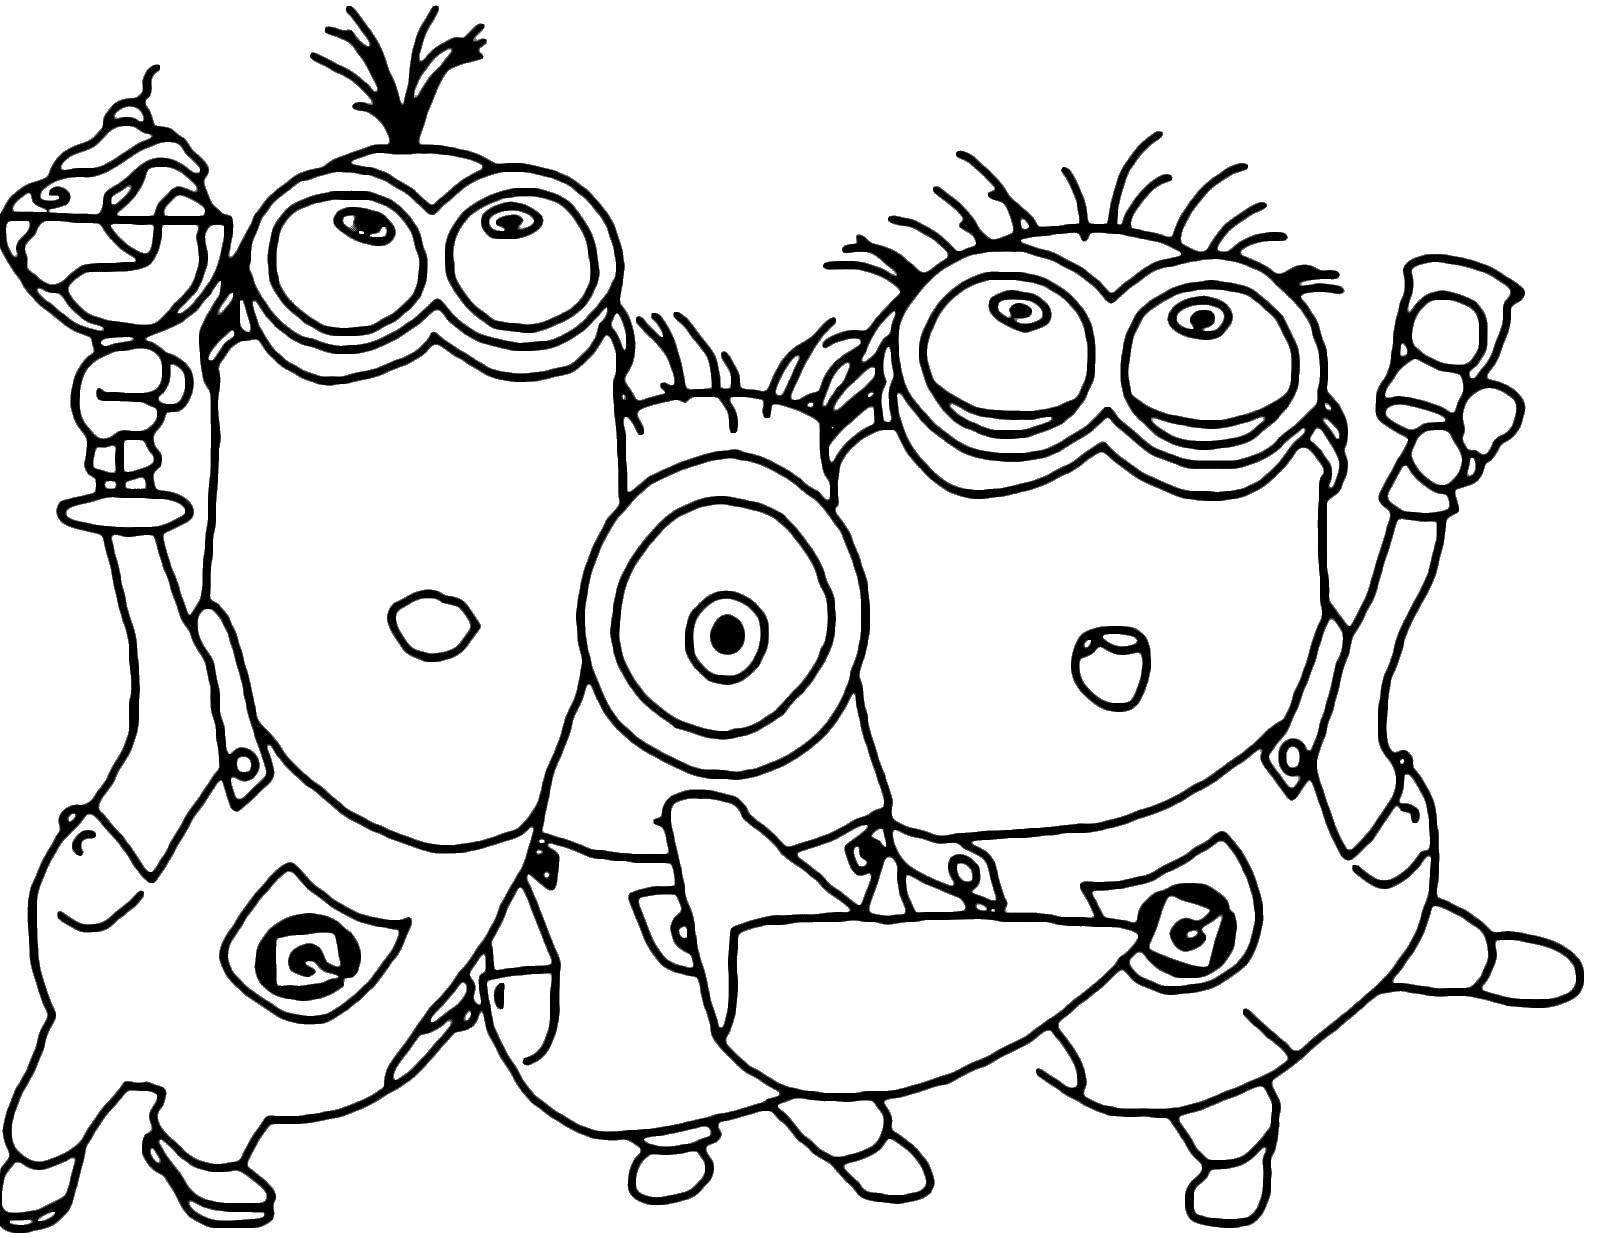 Online coloring pages coloring page minions celebrate minions download print coloring page